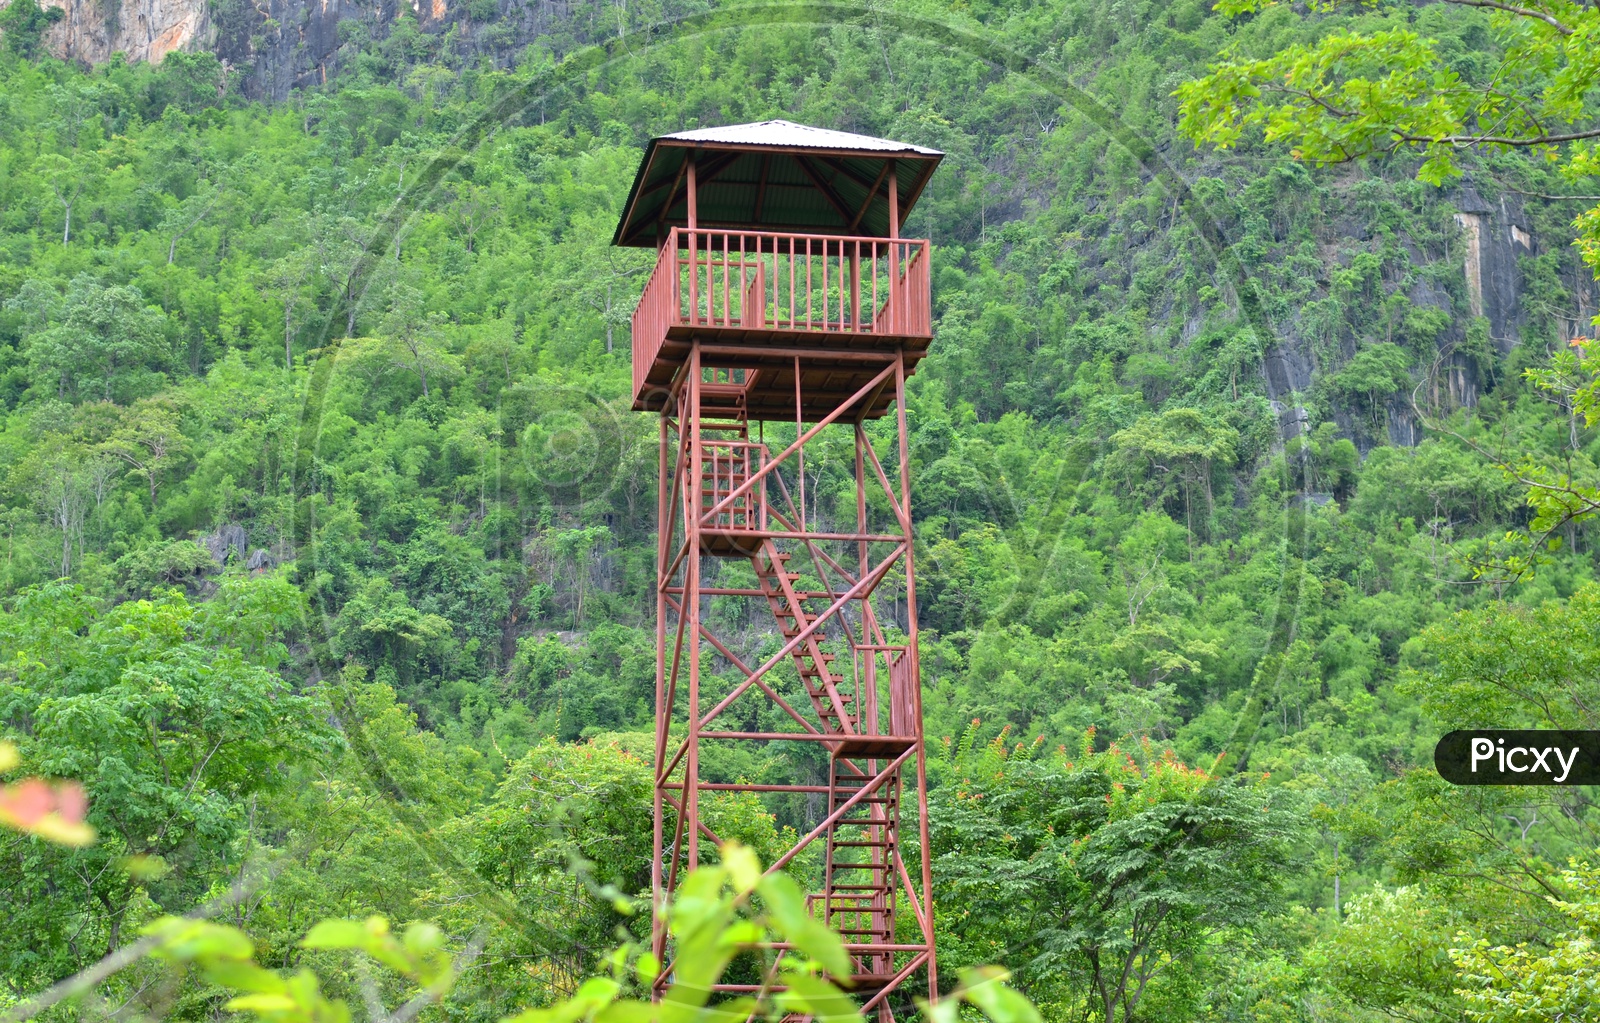 A Tower amidst the wildlife in Thailand